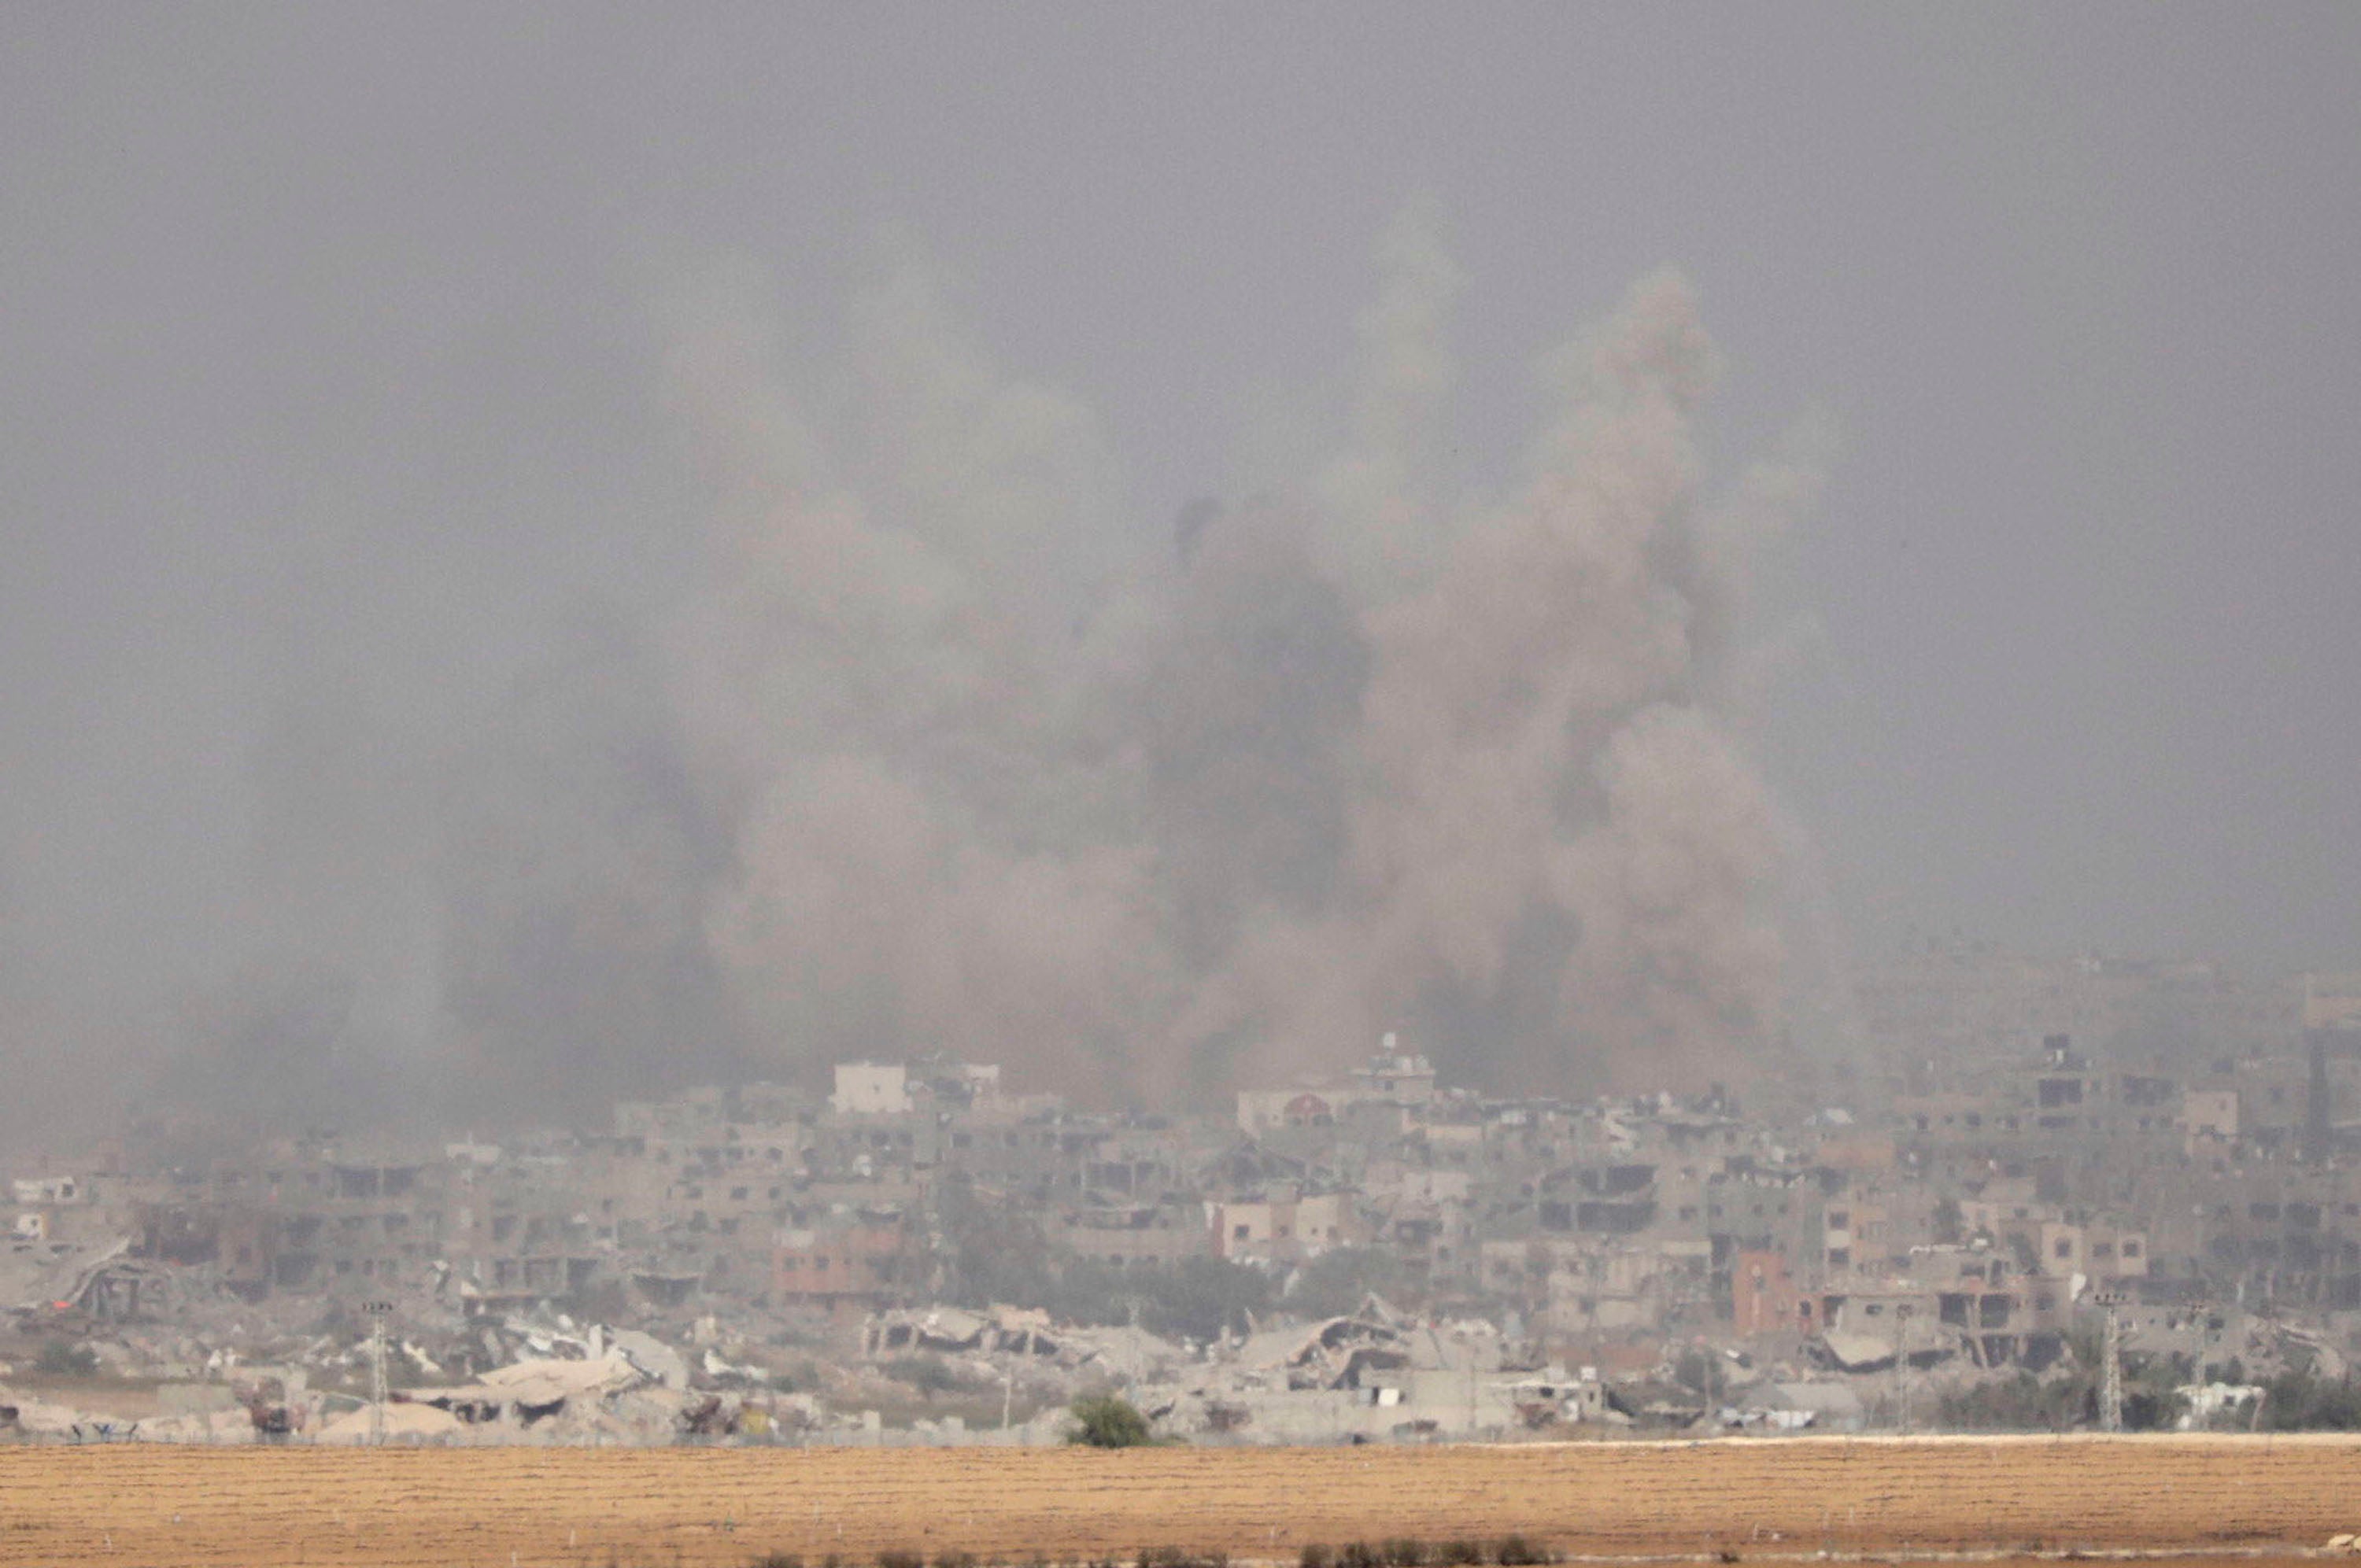 Smoke rises from northern Gaza as seen from the Israeli side of the border on Sunday